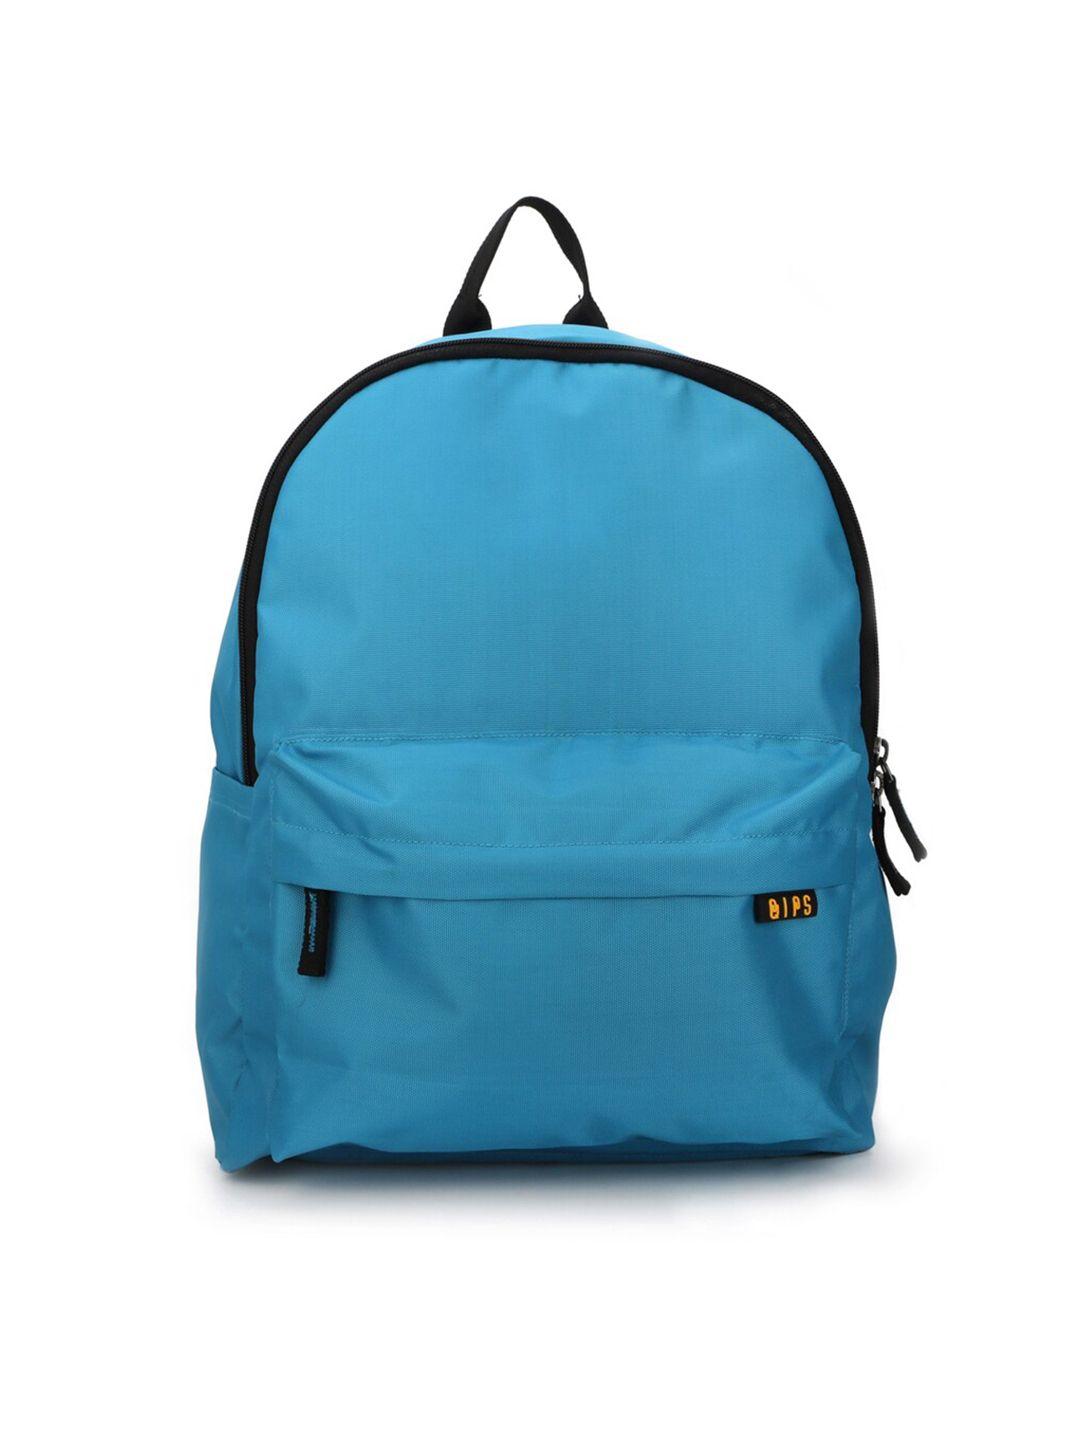 qips unisex turquoise blue 15 inch laptop backpack